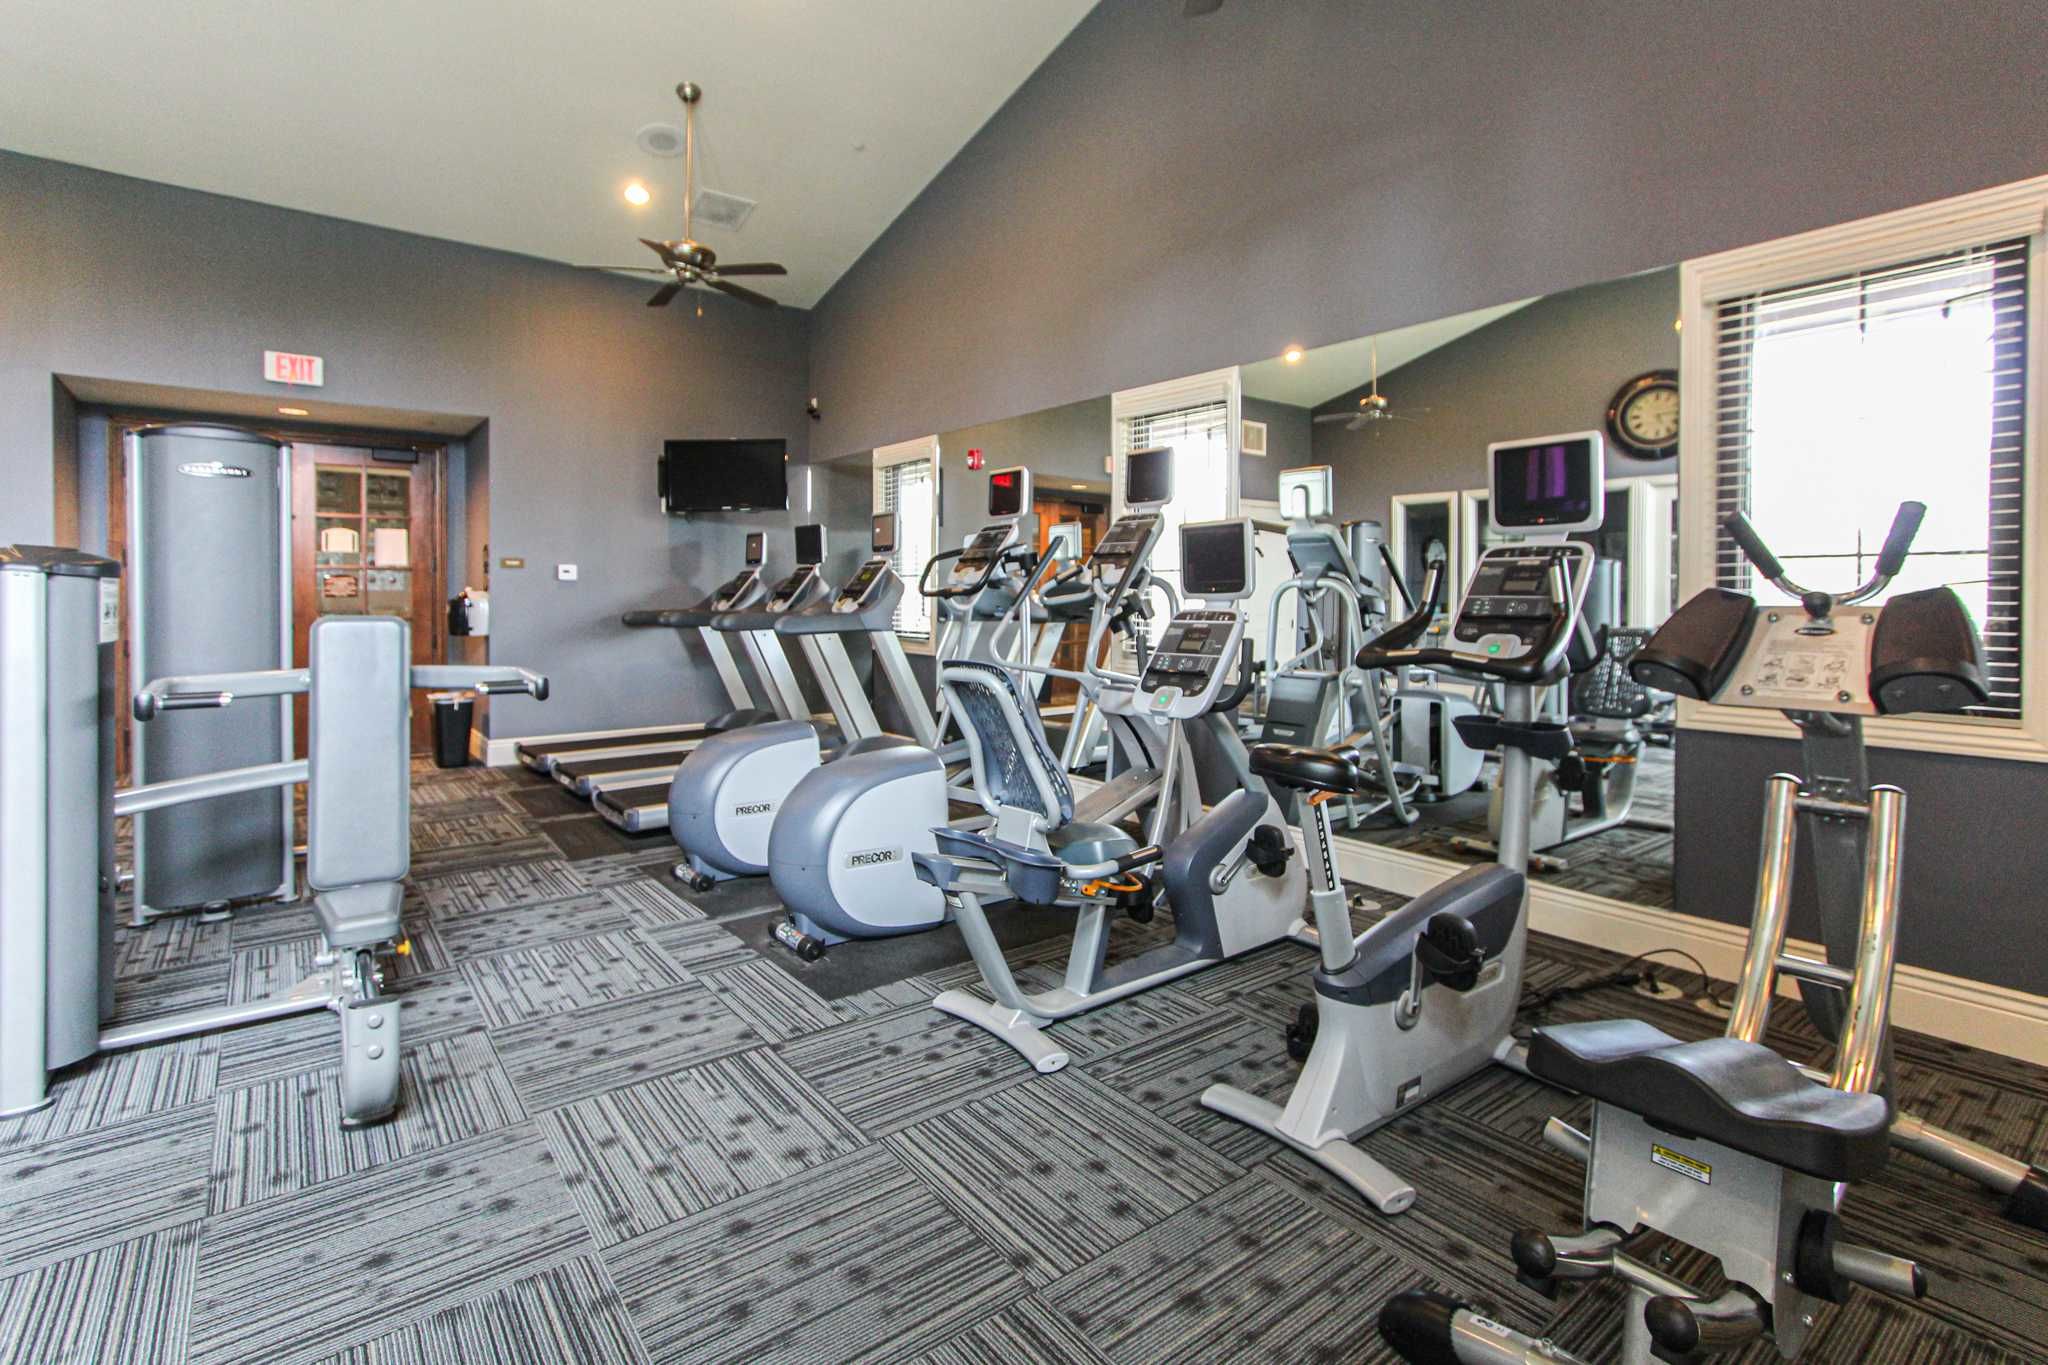 The fitness center at San Miguel in Point Mugu, California